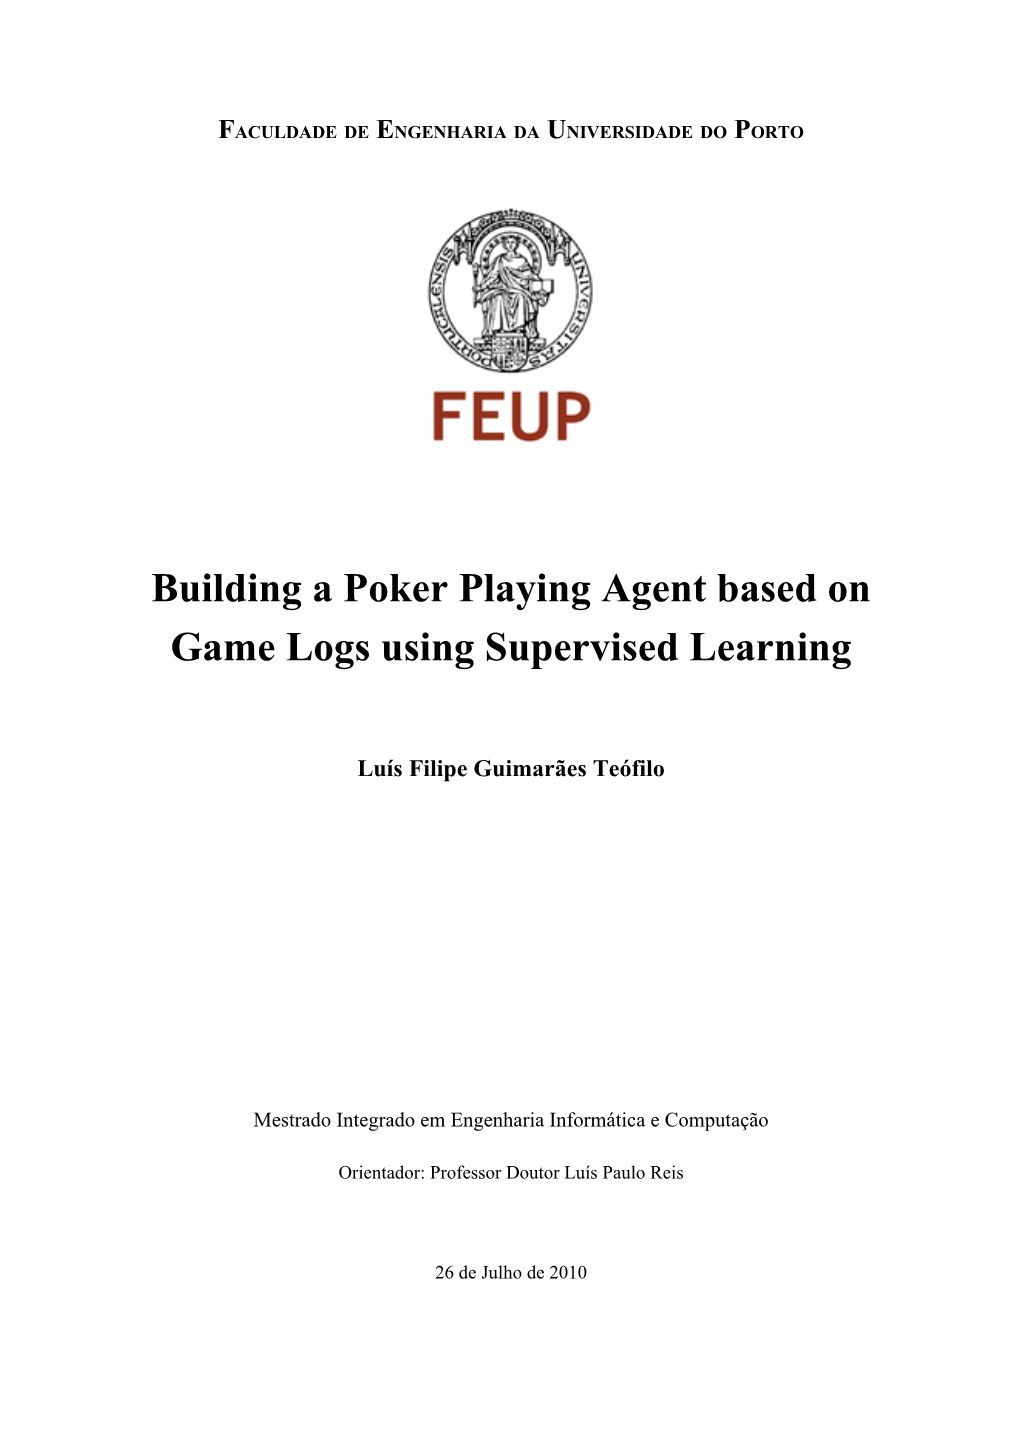 Building a Poker Playing Agent Based on Game Logs Using Supervised Learning